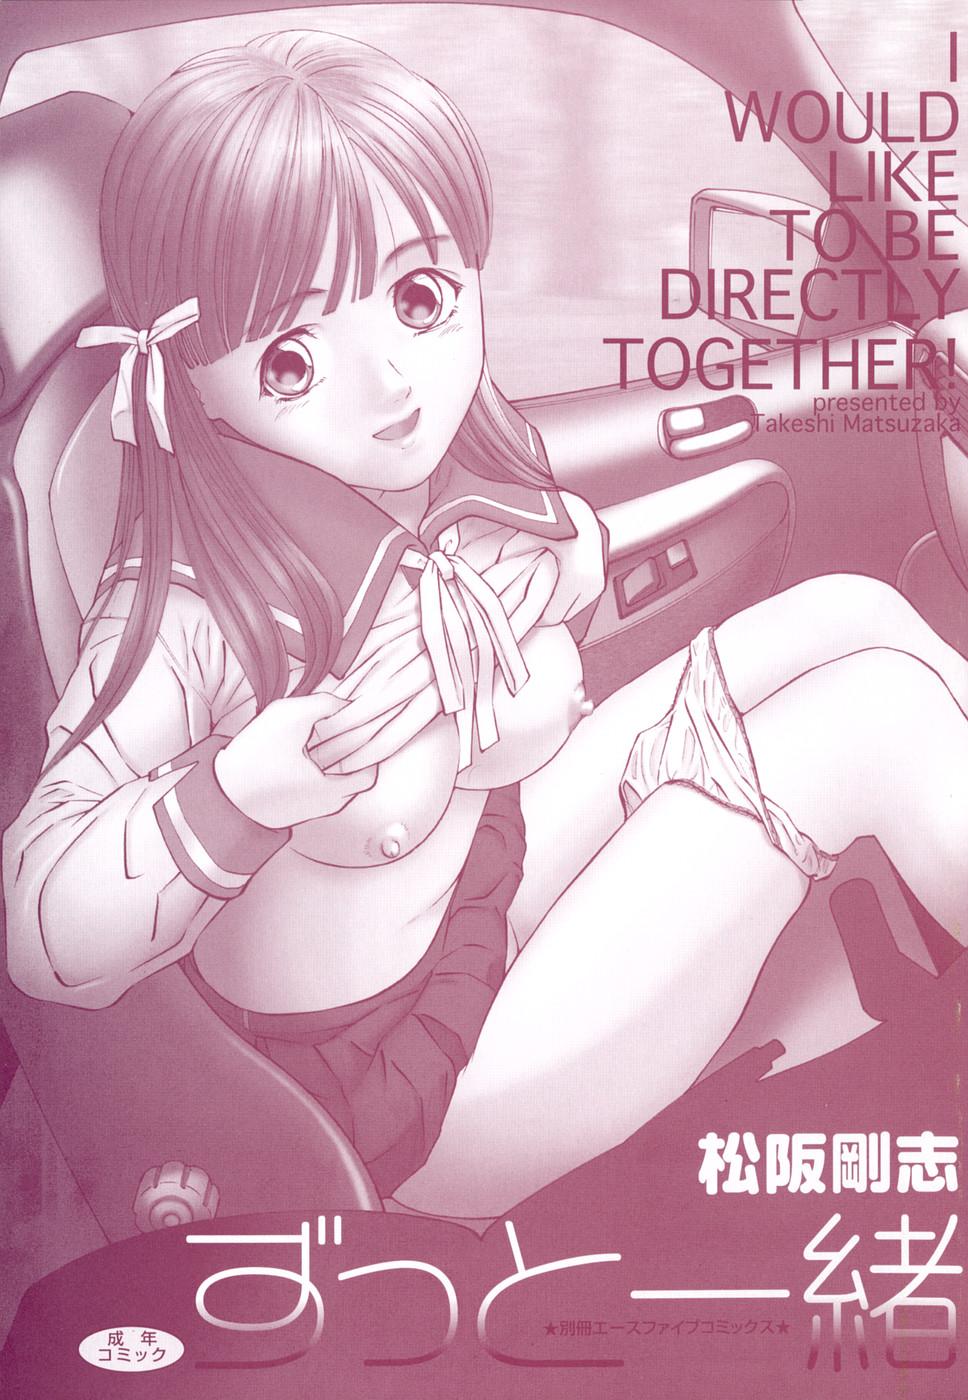 Zutto Issho - I would like to be directly together! 1